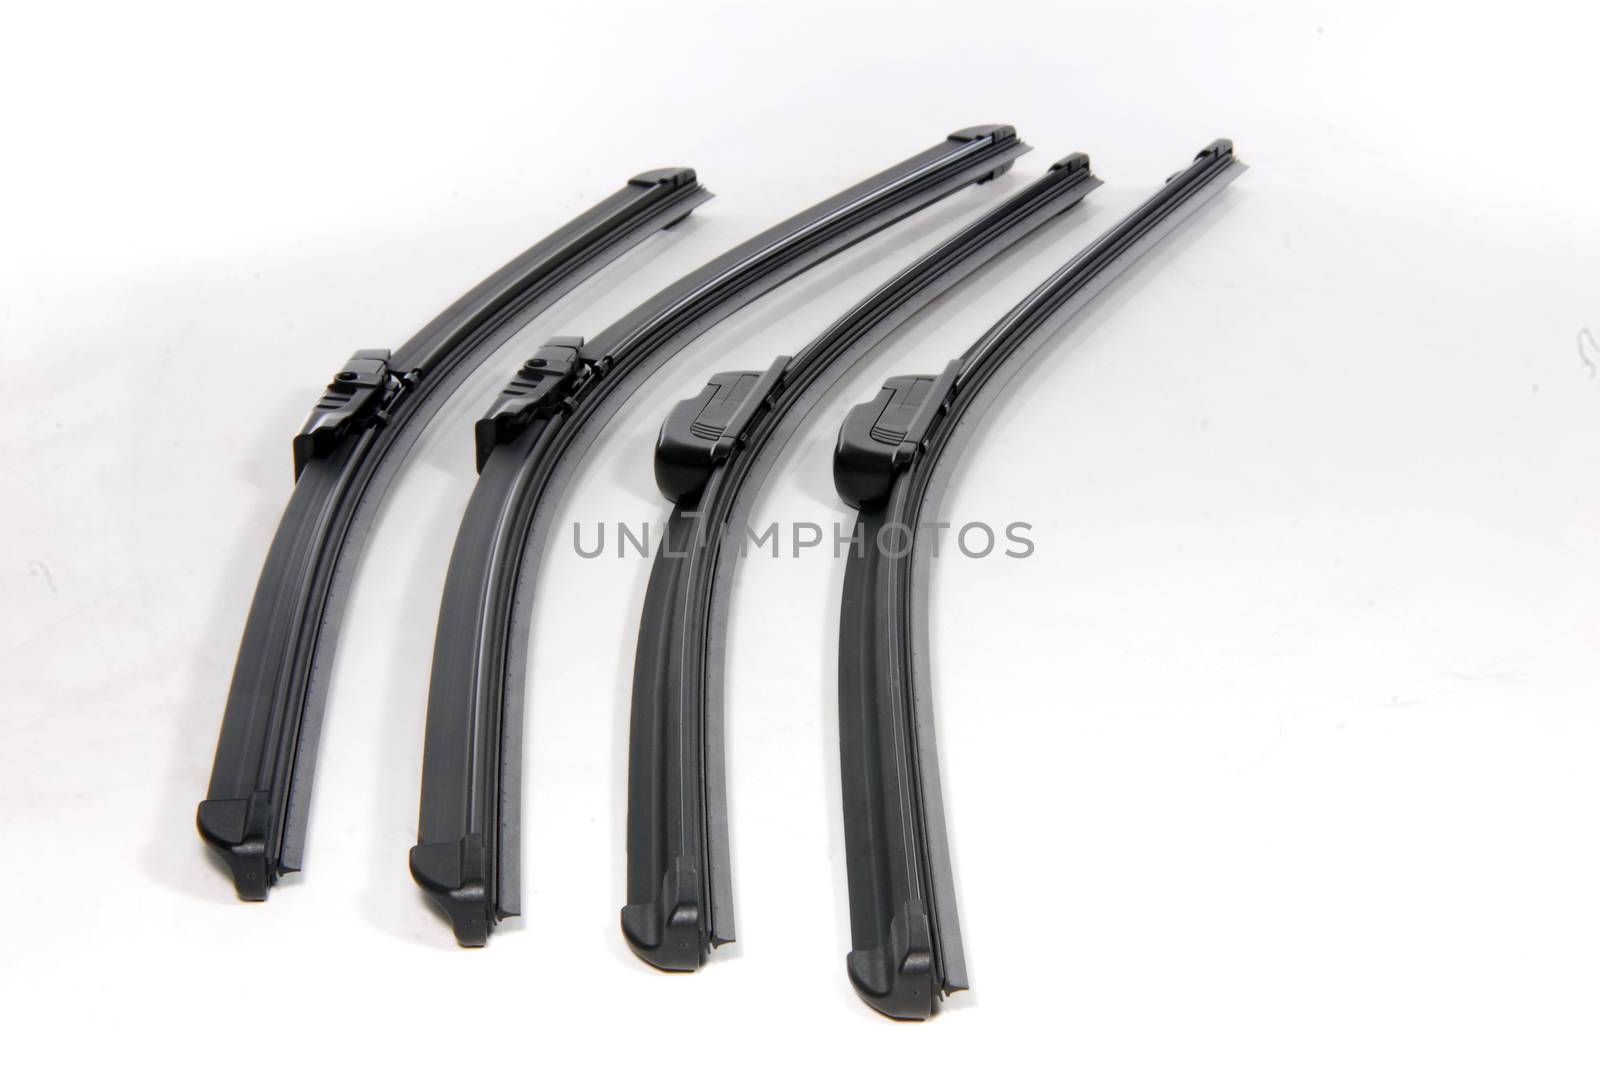 windshield wipers   Cars windshield wipers by aselsa